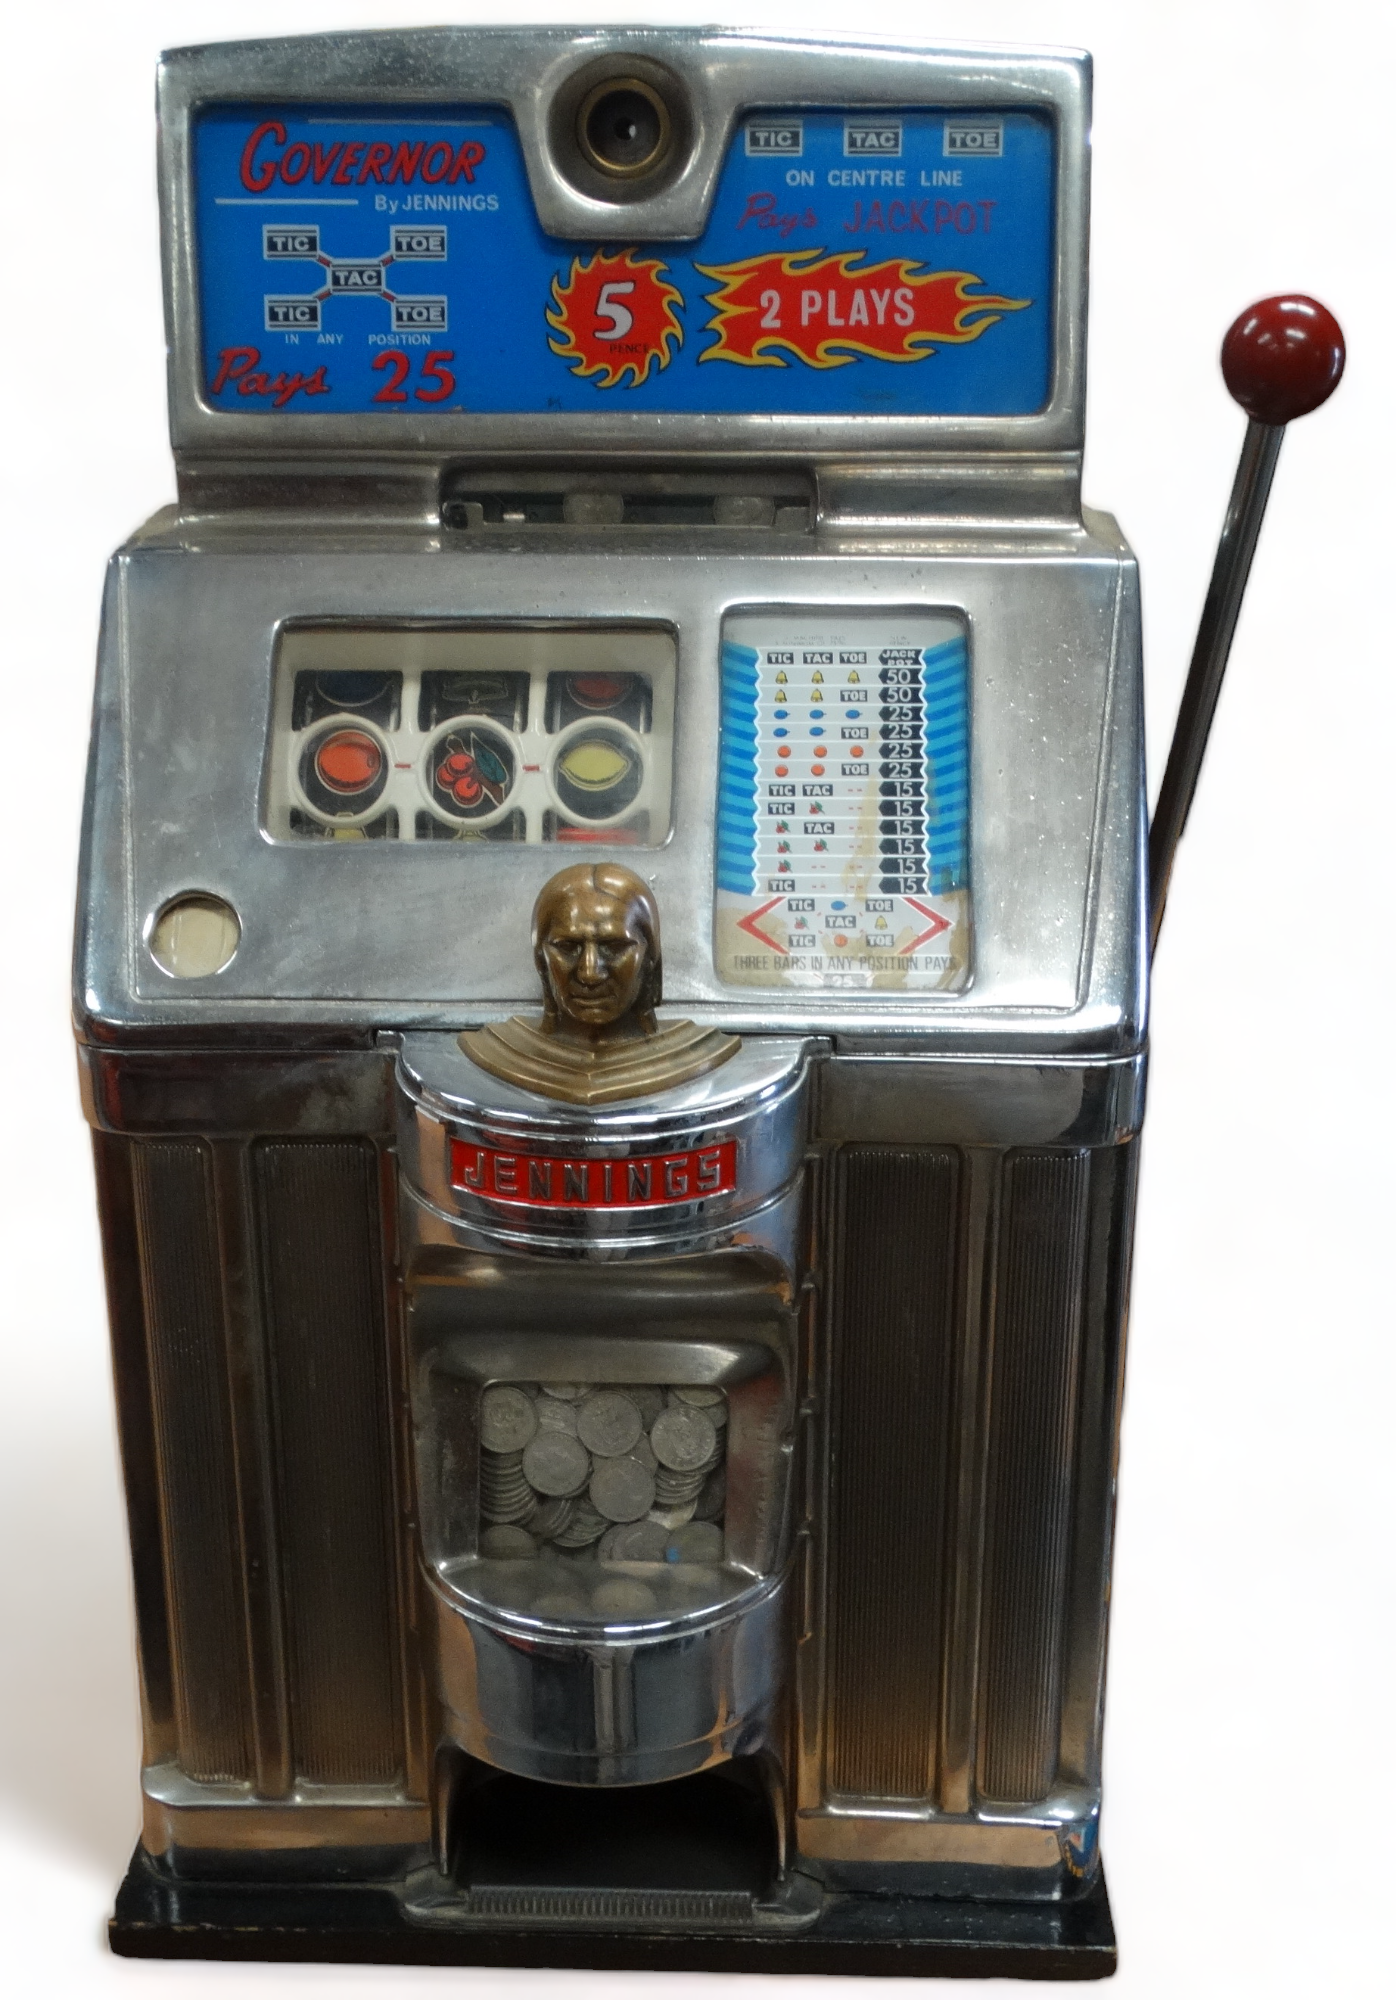 A Jennings-Governor mid 20th century American one arm bandit slot machine - chrome case with Tic- - Image 3 of 4